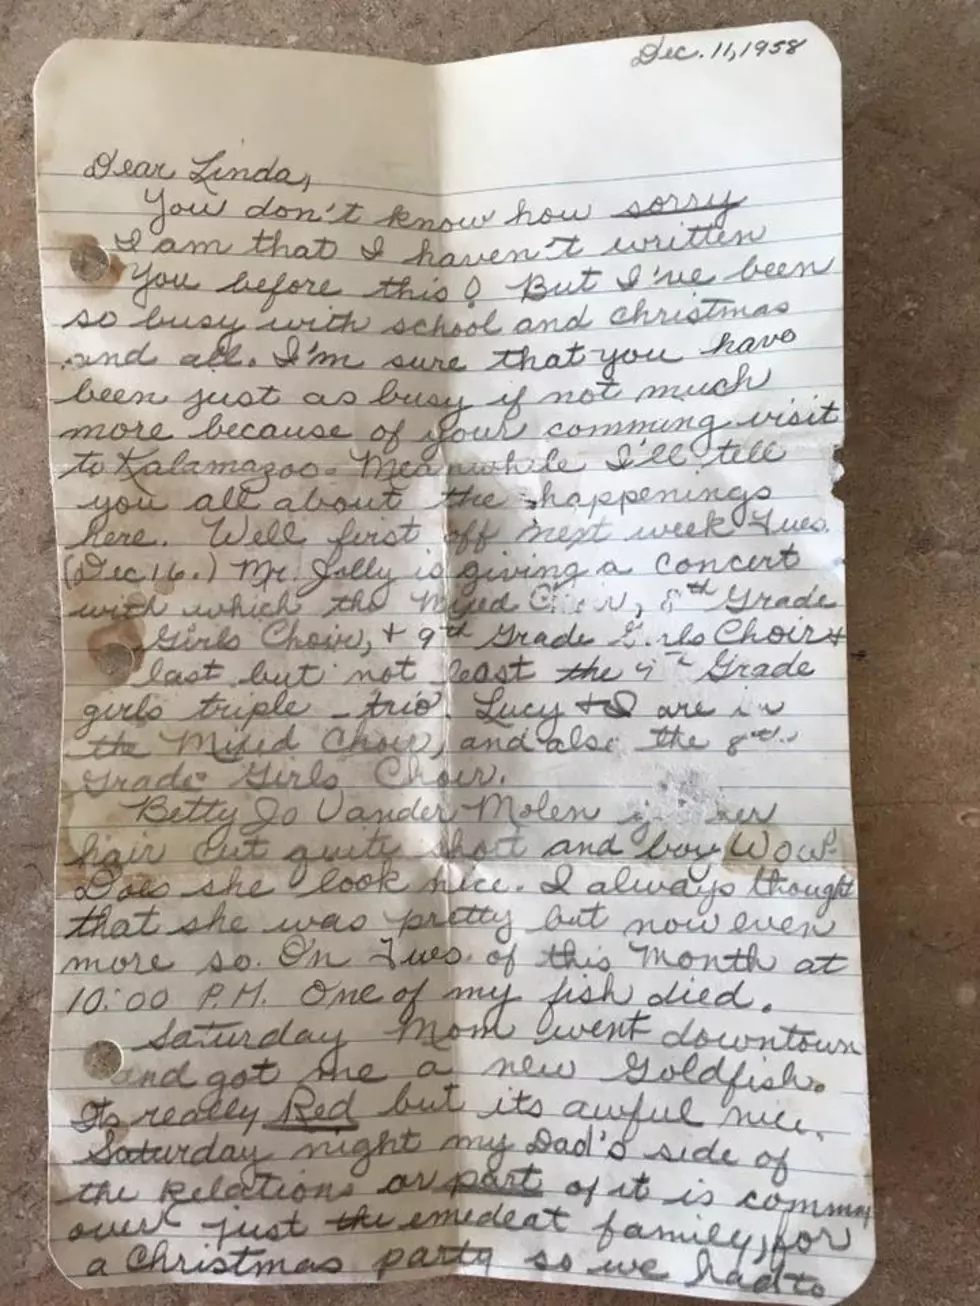 Letter from 1950s Discovered During Construction Work at Milwood Elementary in Kalamazoo [PHOTOS]